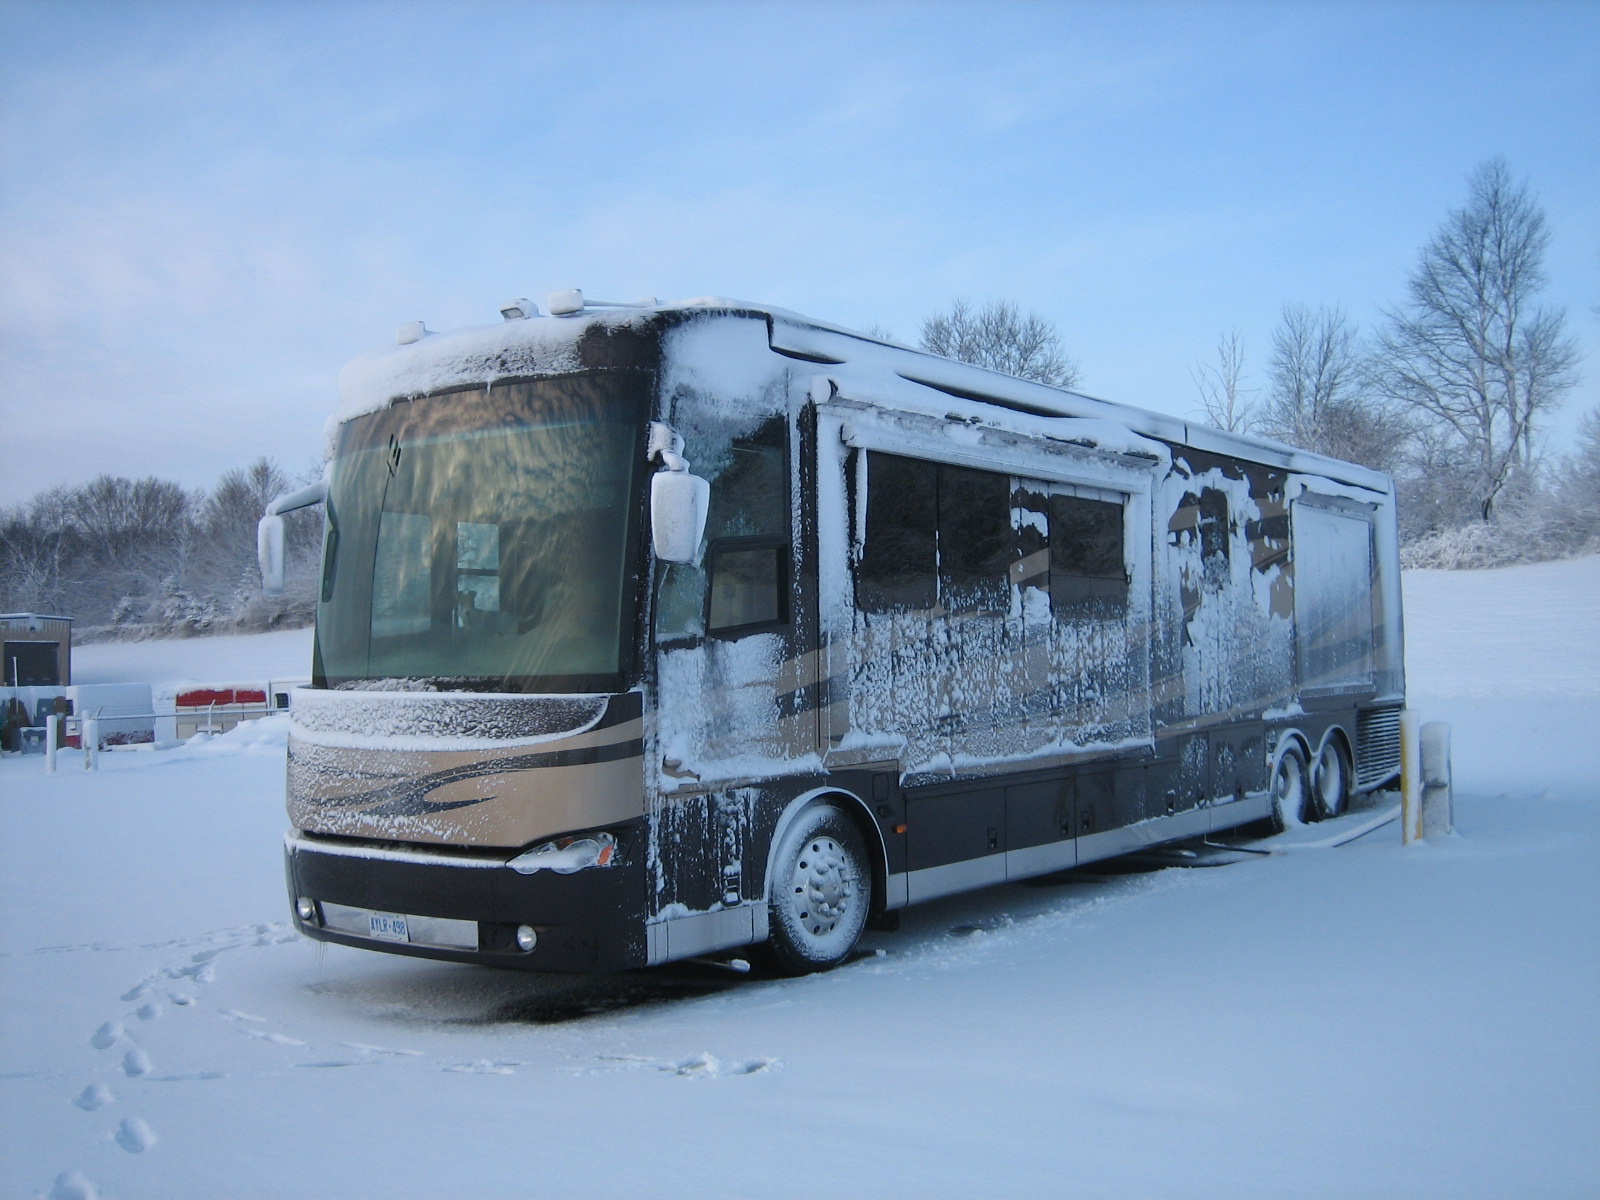 A motorhome sits on a snowby lot encrusted with snow and icicles.